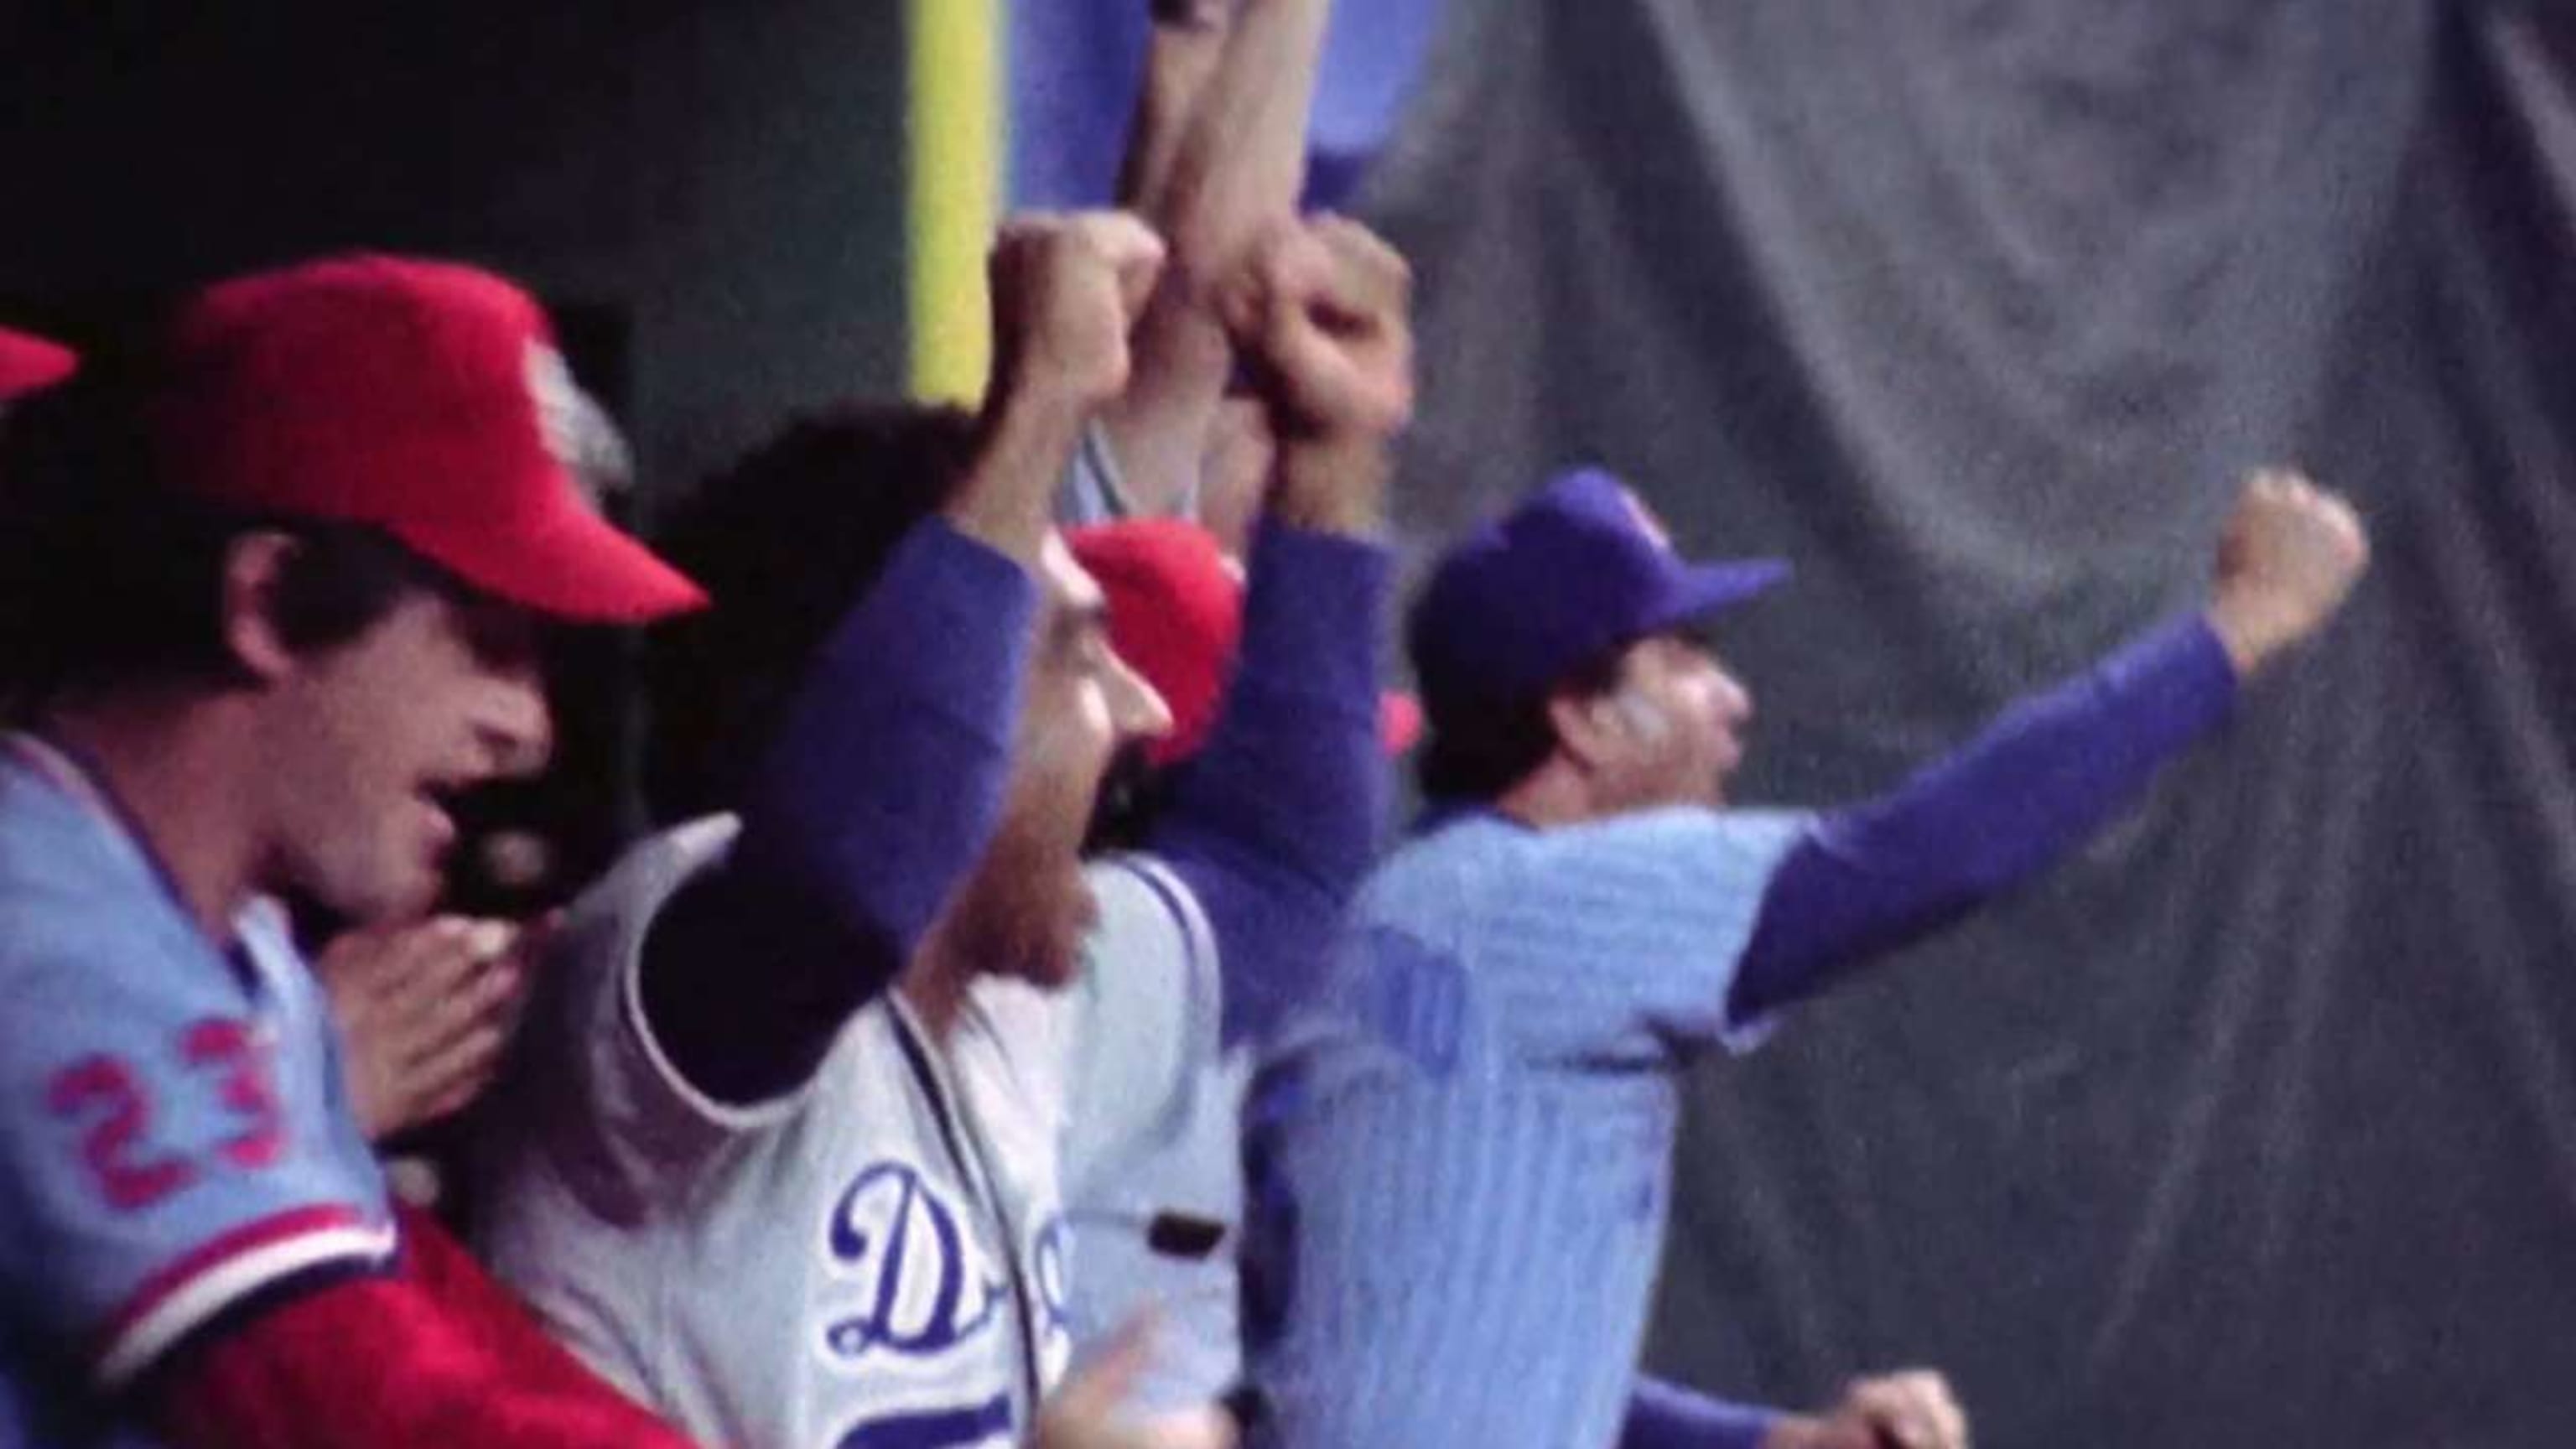 Johnny Callison hits walk-off homer in '64 ASG